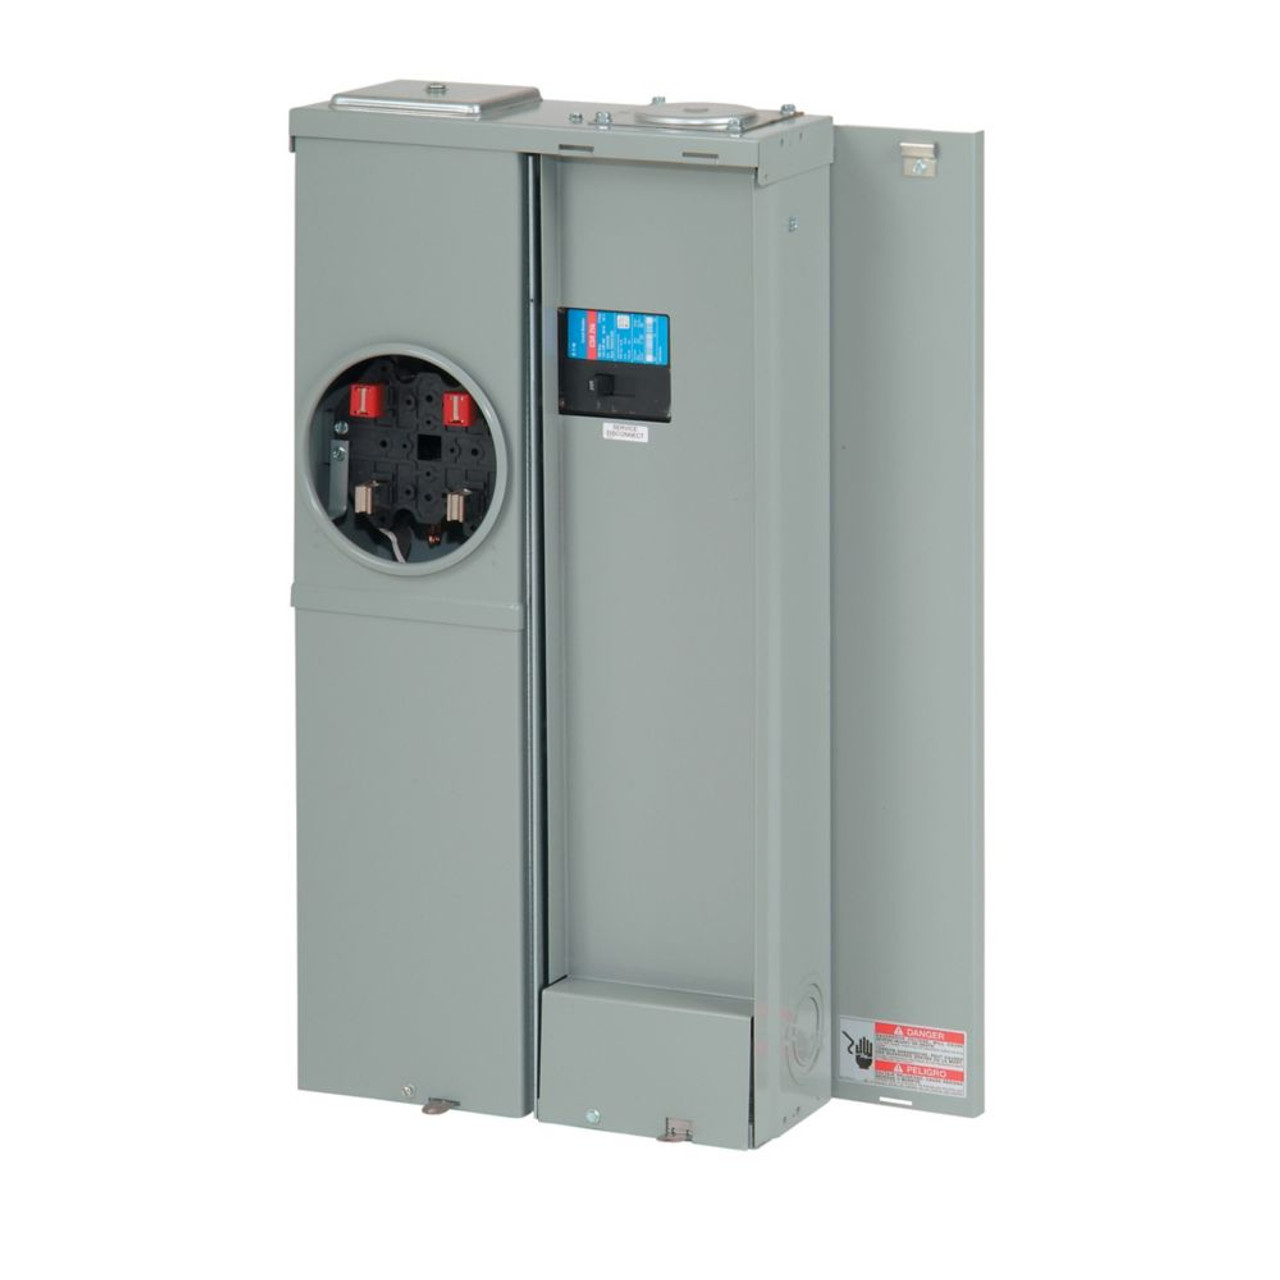 EUSERC Approved CMBEB200BTS Eaton Meter
200A Main Breaker Included
(No Branch Service)